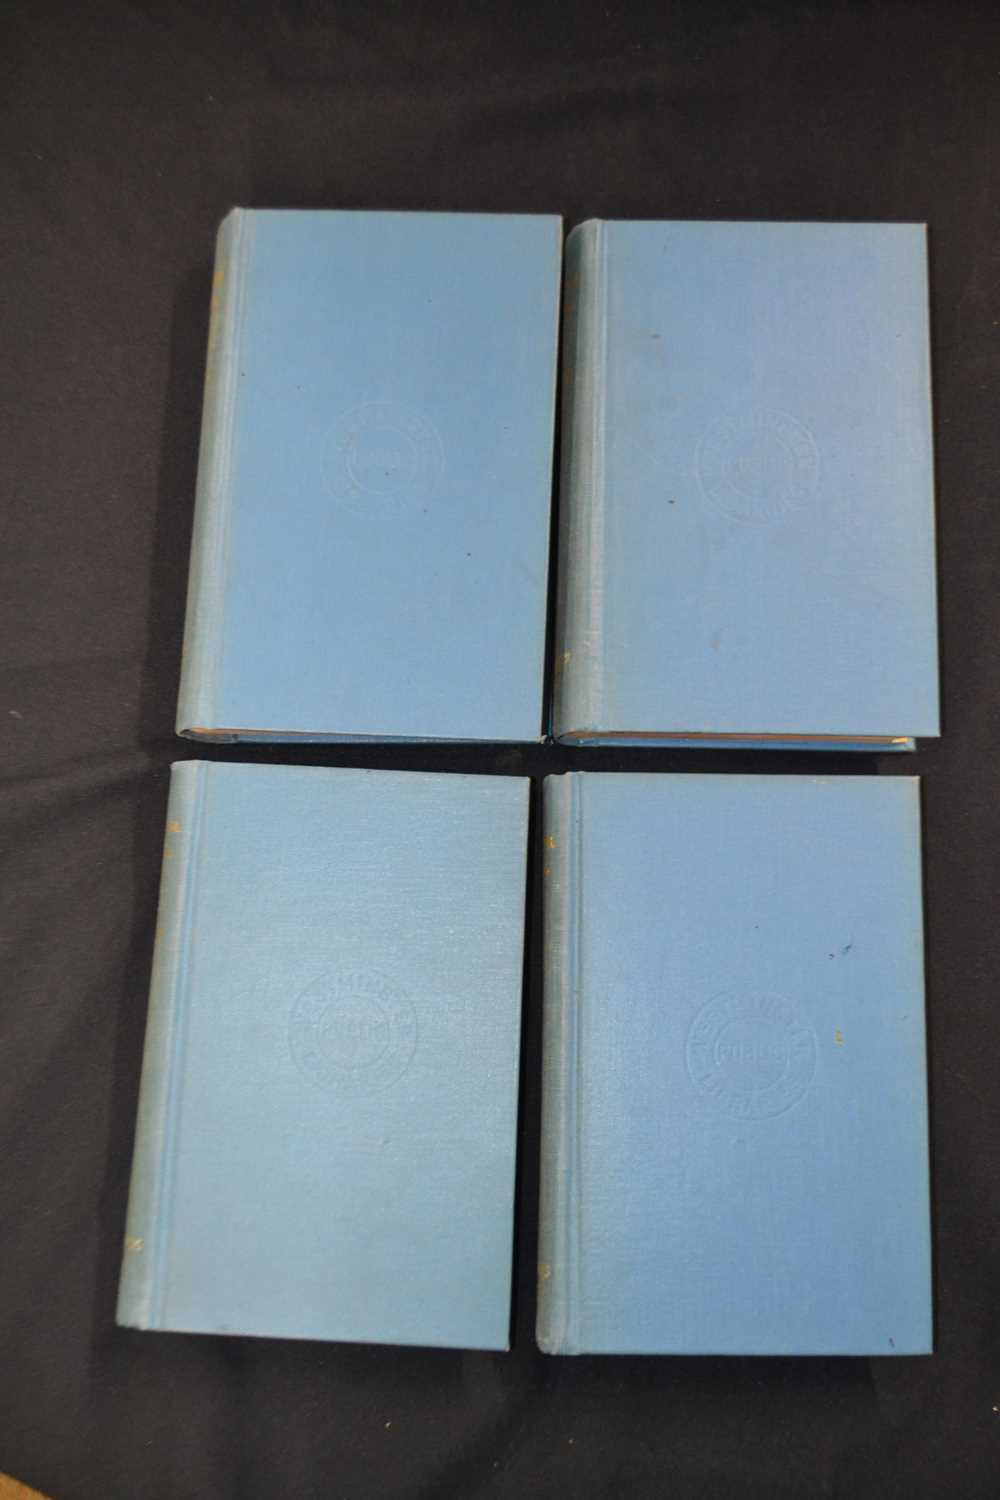 T A BRASSEY: THE NAVAL ANNUAL: 4 volumes, 1890. Ex library in ex library binding. Ffeps removed as - Image 2 of 4